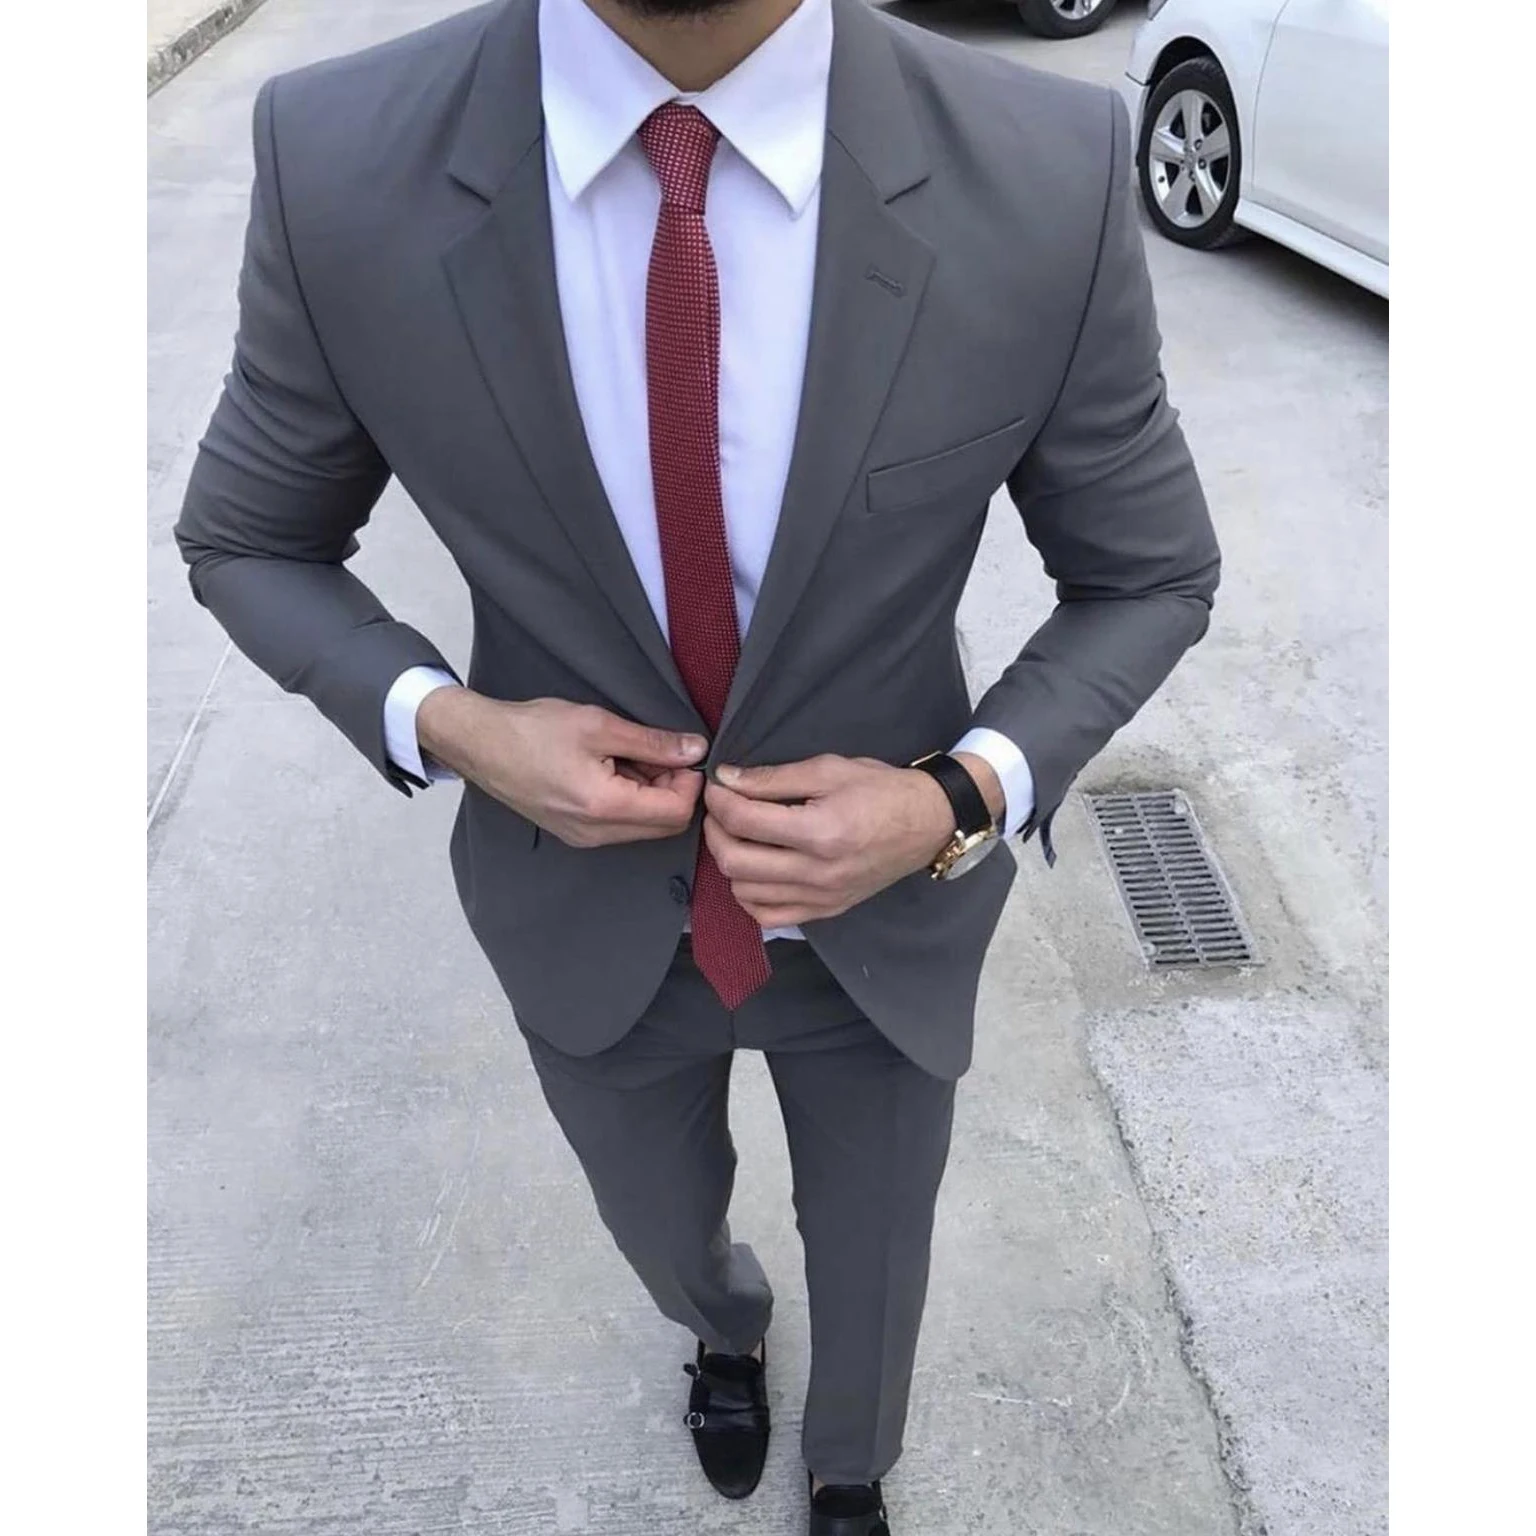 Gray Wedding Tuxedos Men's Suits Slim Fit Beach Groomsmened Lapel Formal Black Couple Prom Party Two Pieces Suit Jacke Pants